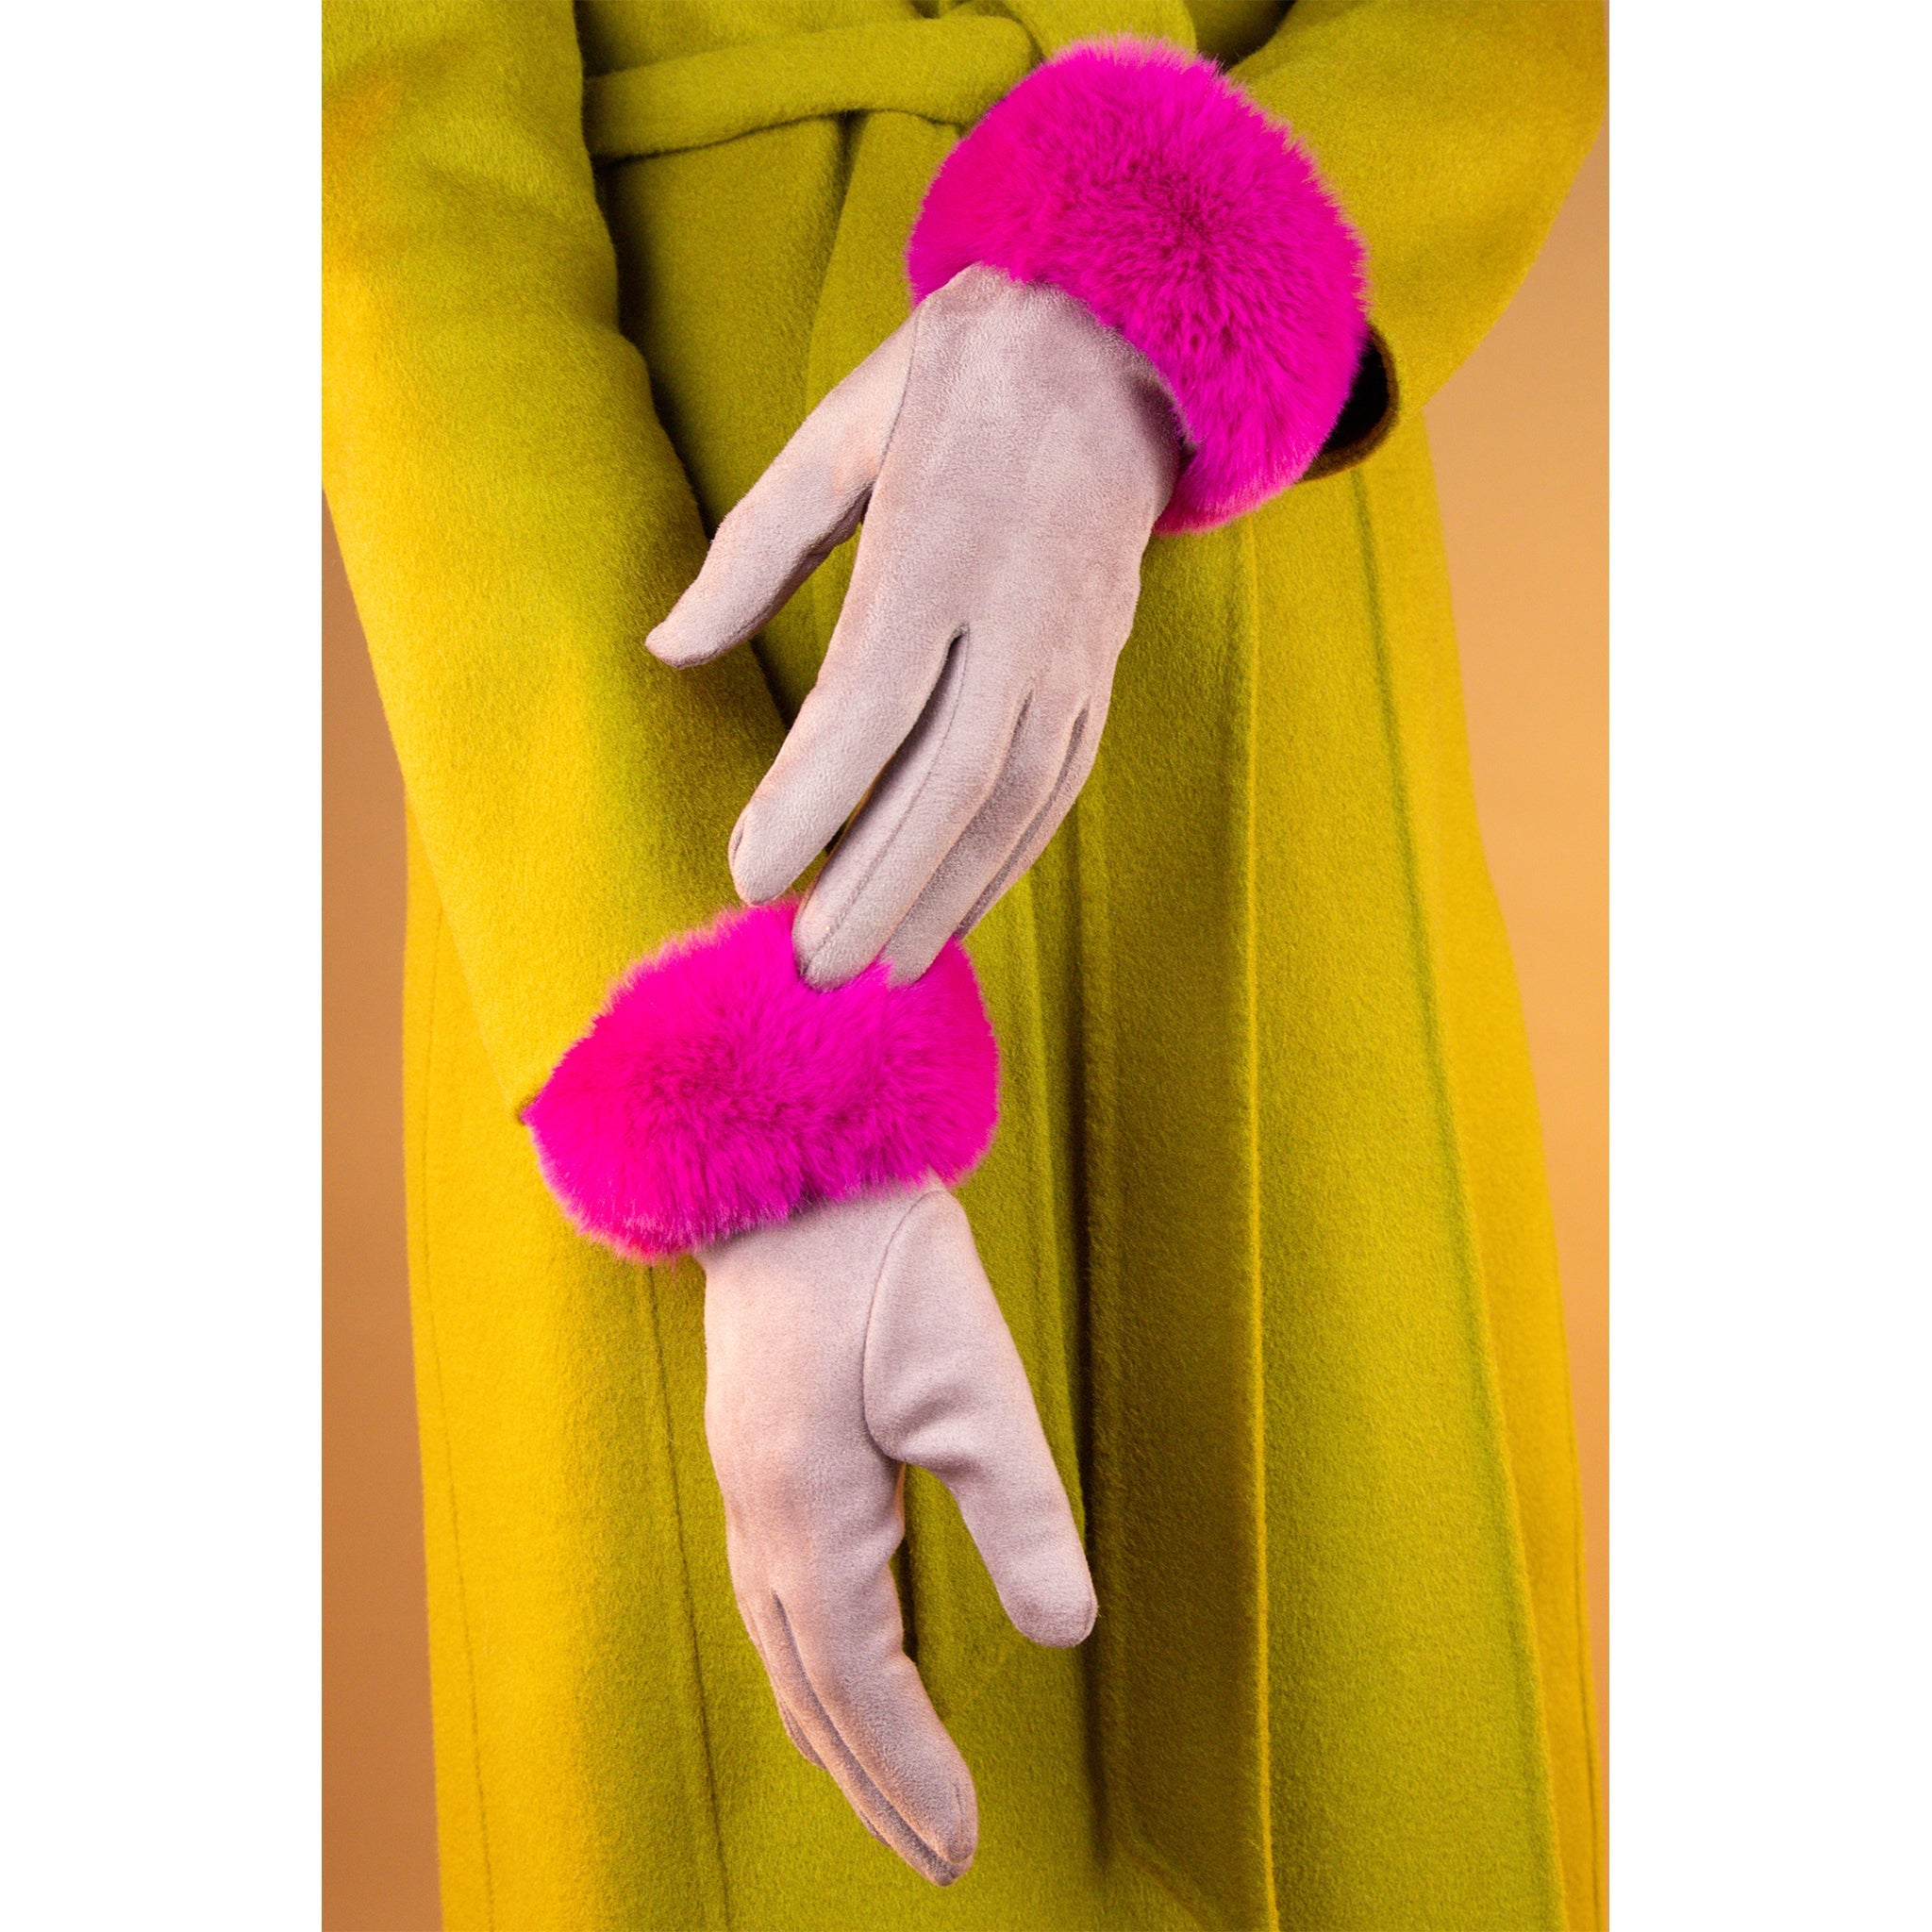 Bettina Faux Suede Gloves by Powder